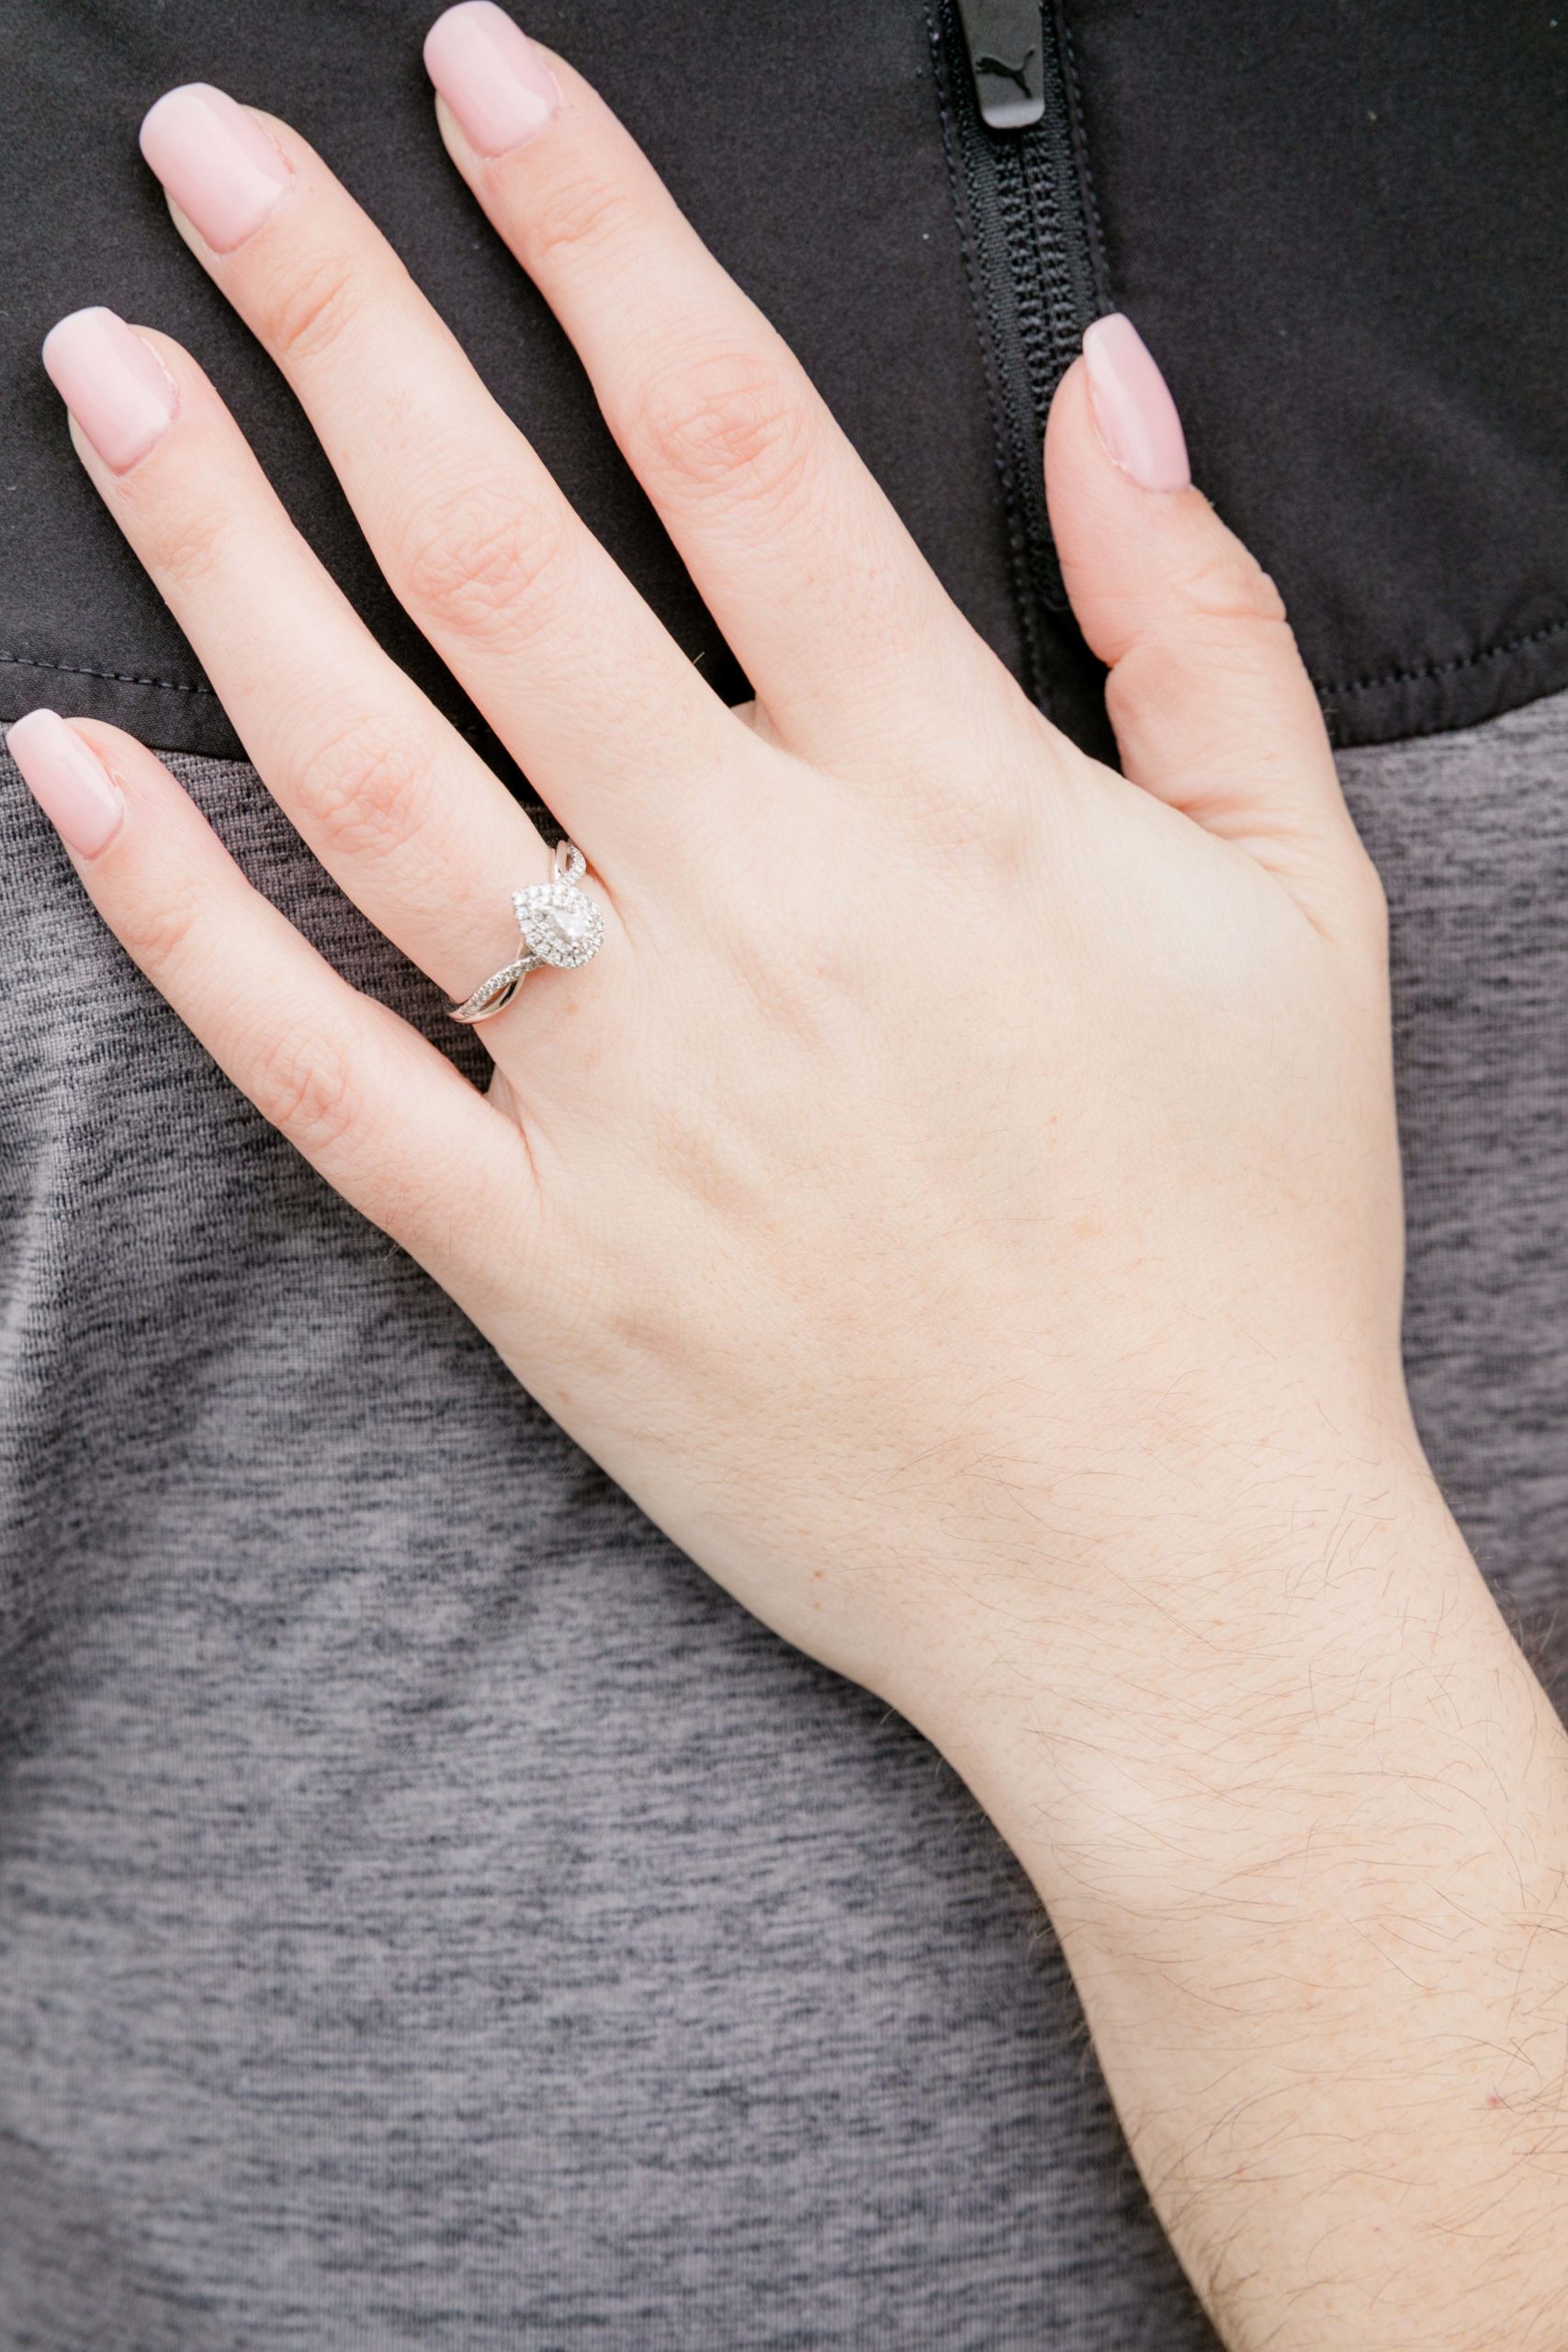 Upclose shot of an engagement ring.